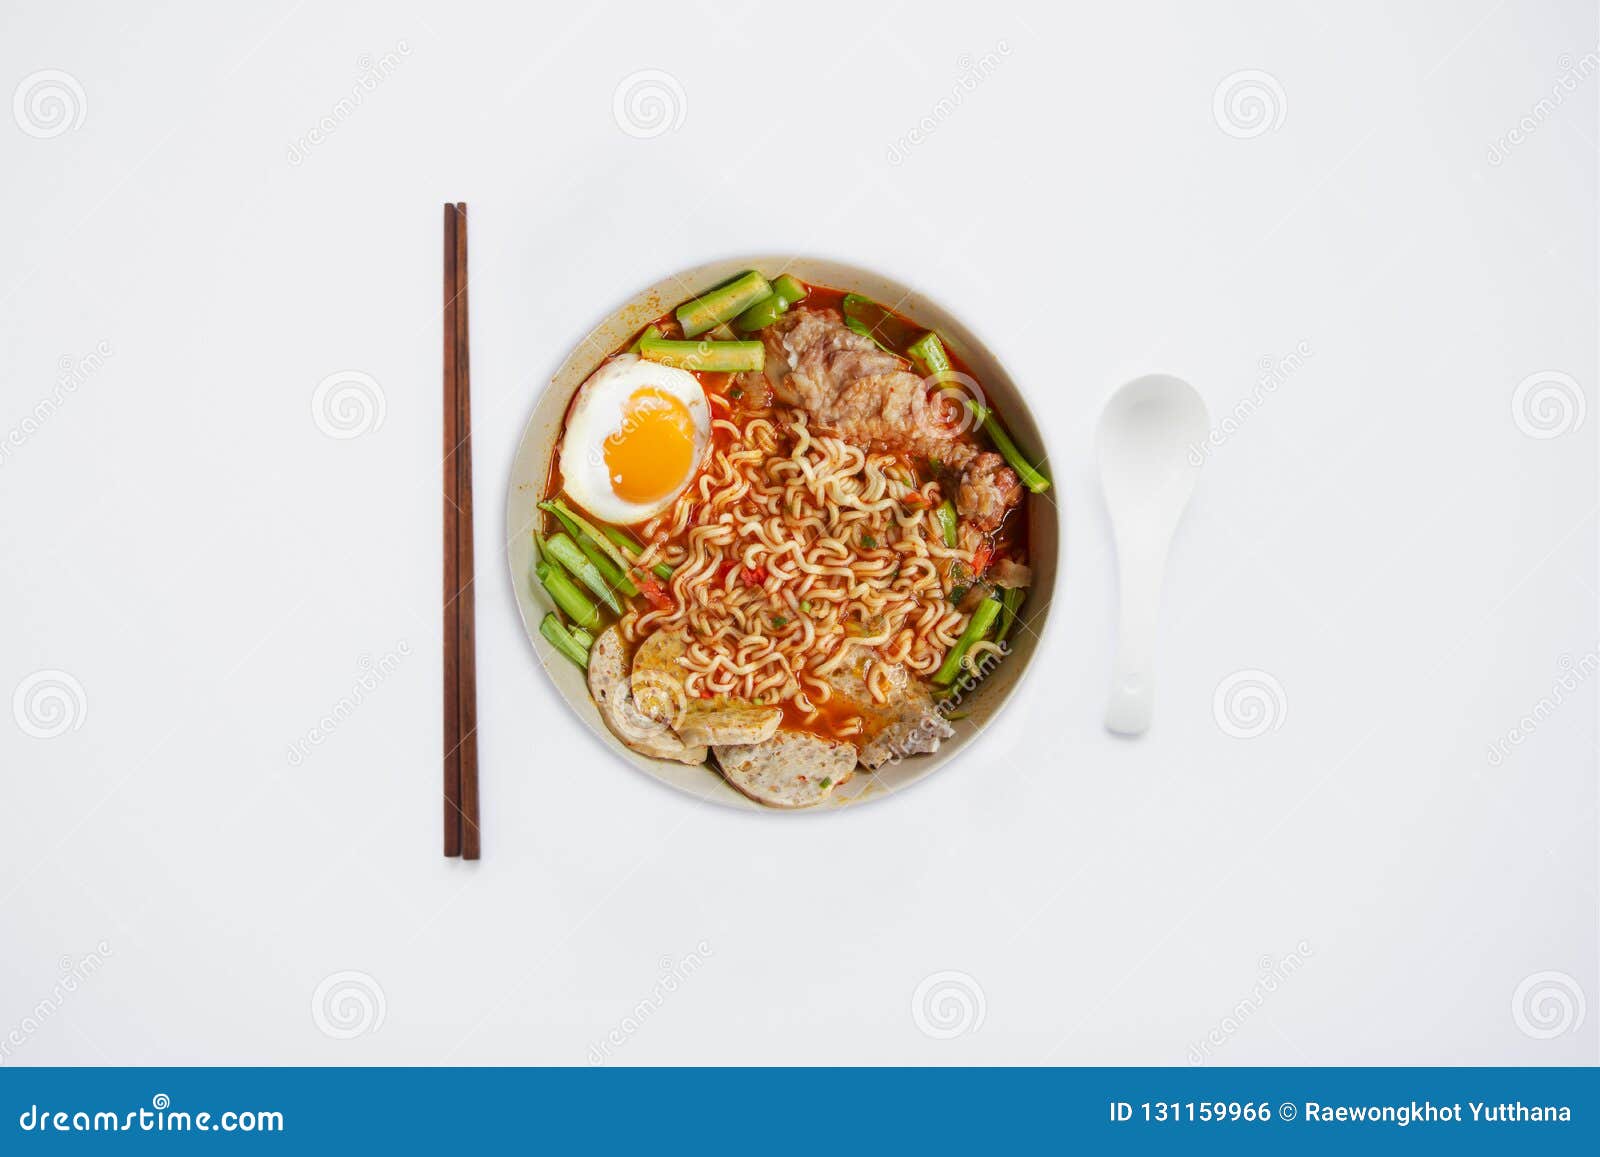 Hot And Spicy Noodle In Bowl And Ingredients On Isolated White ...